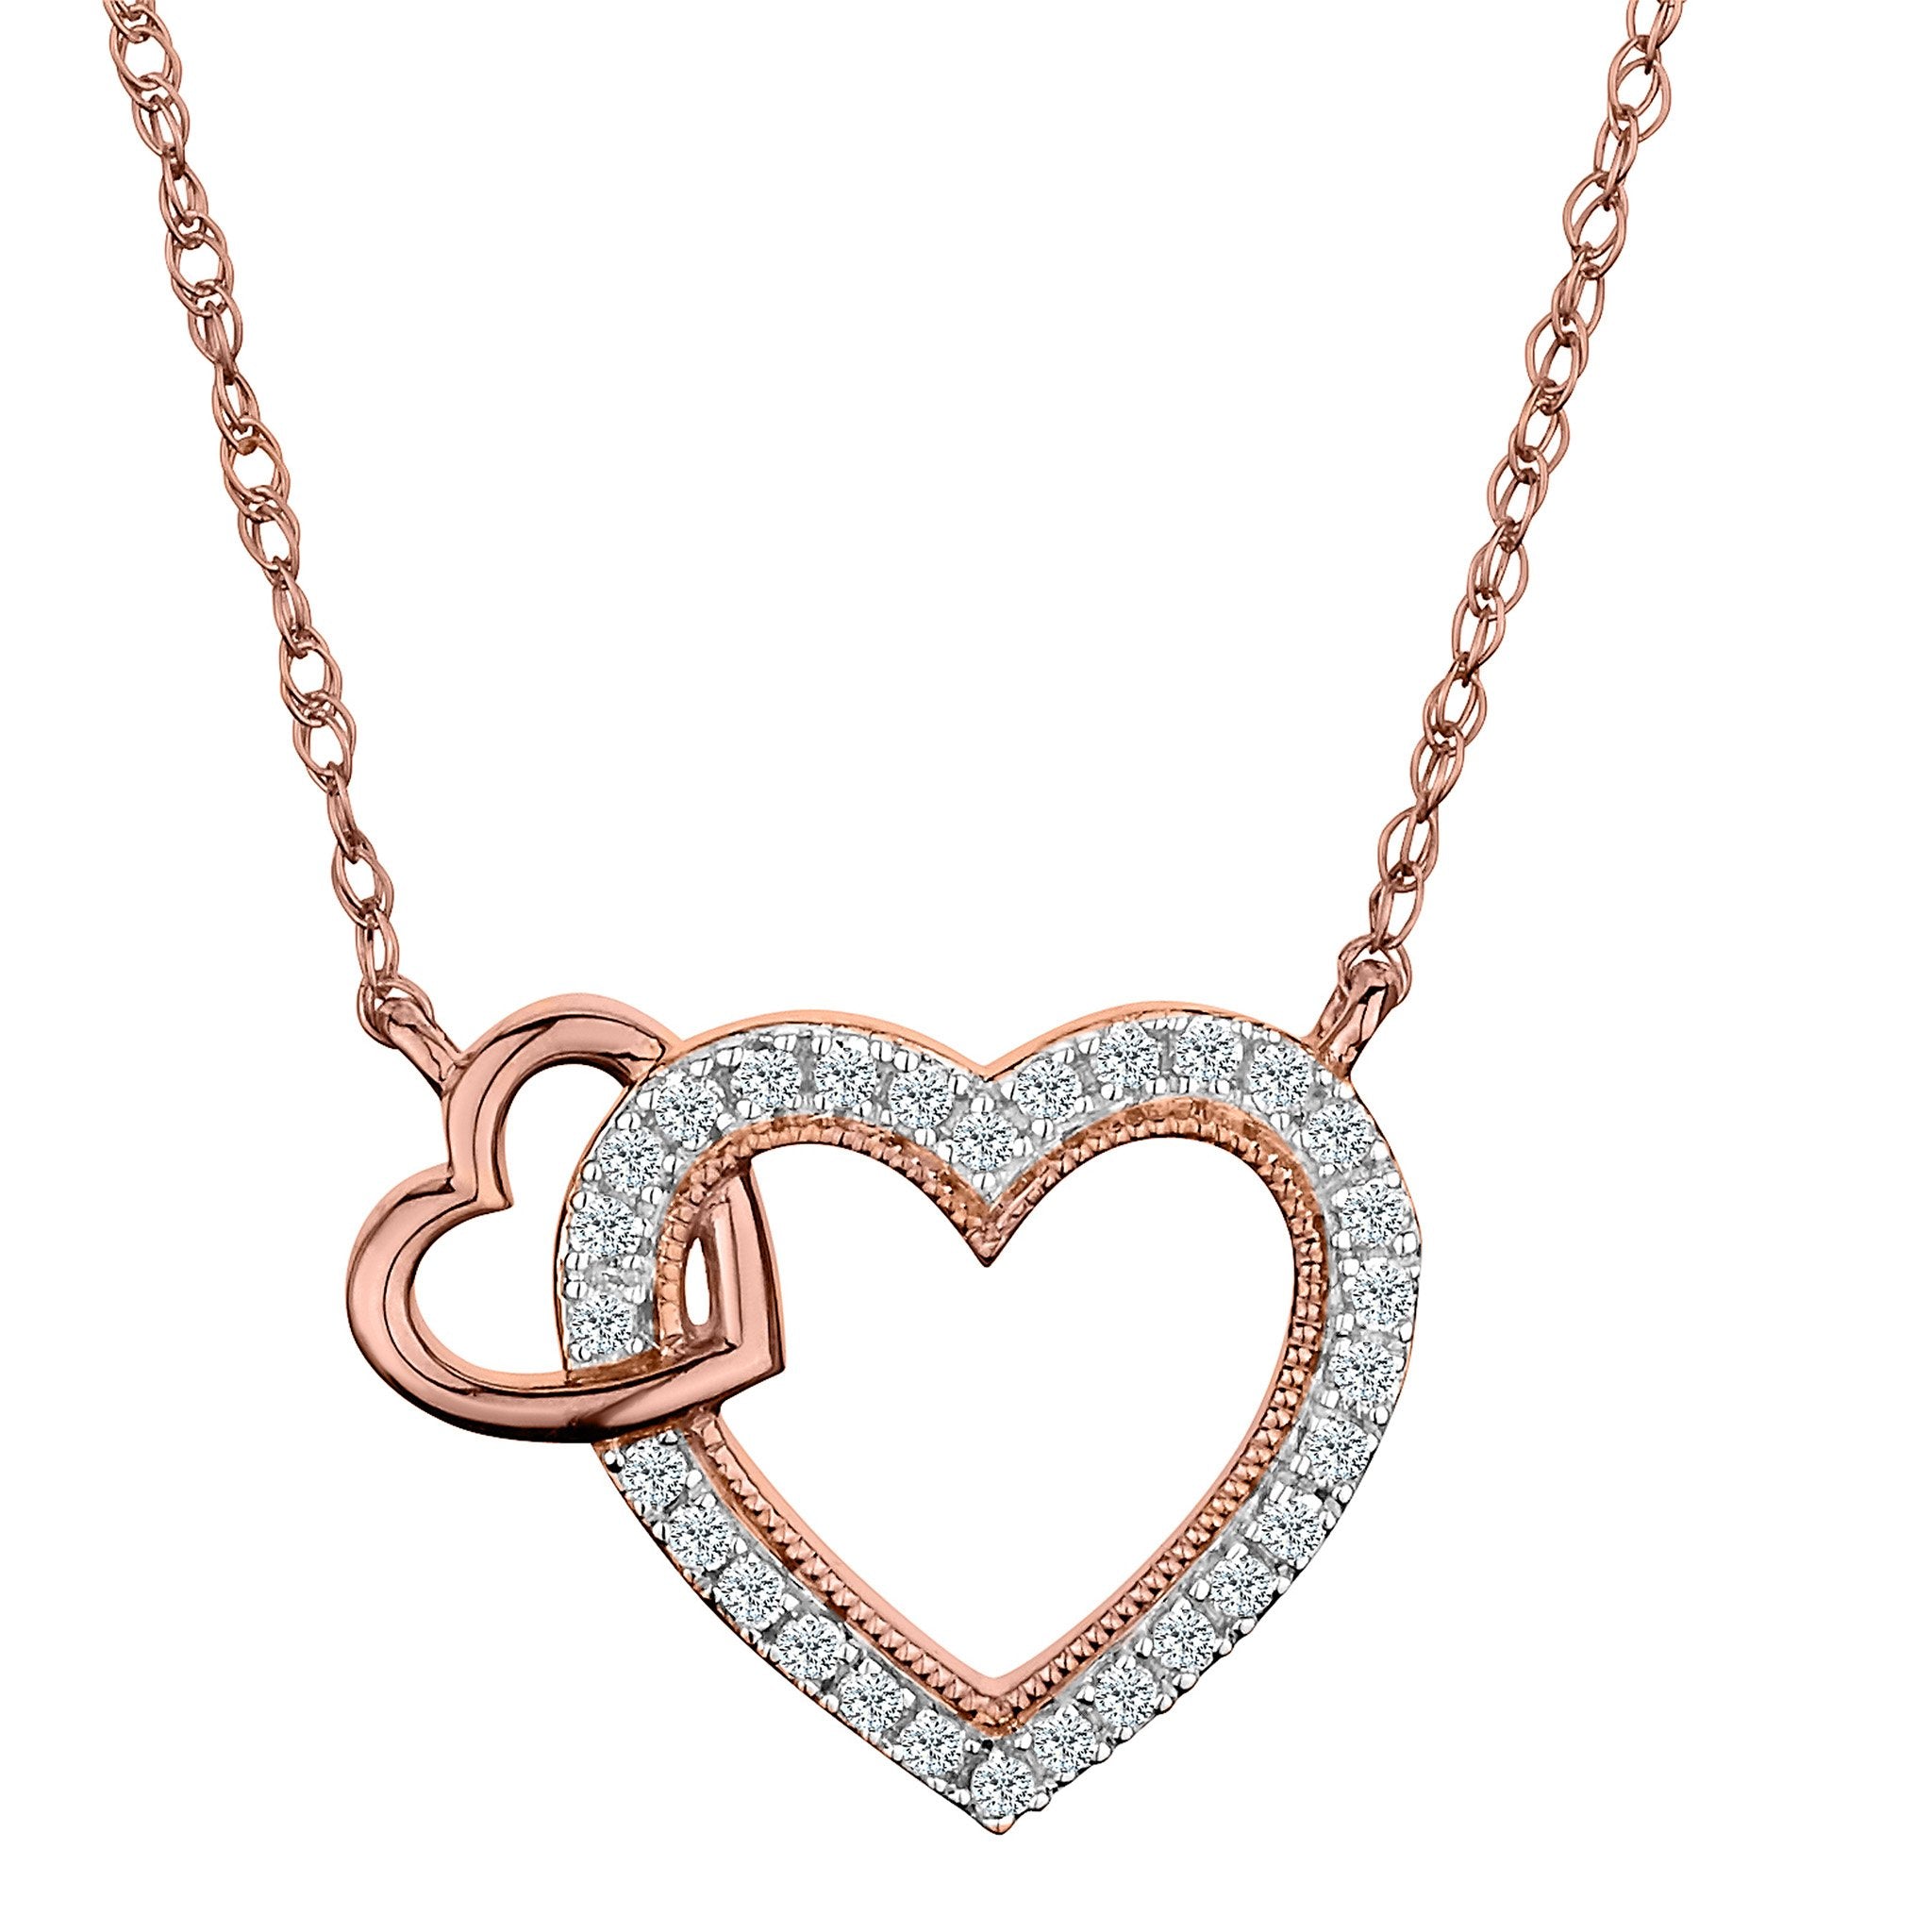 .12 Carat "Linked Hearts" Diamond Pendant,  10kt Rose Gold. Necklaces and Pendants. Griffin Jewellery Designs.